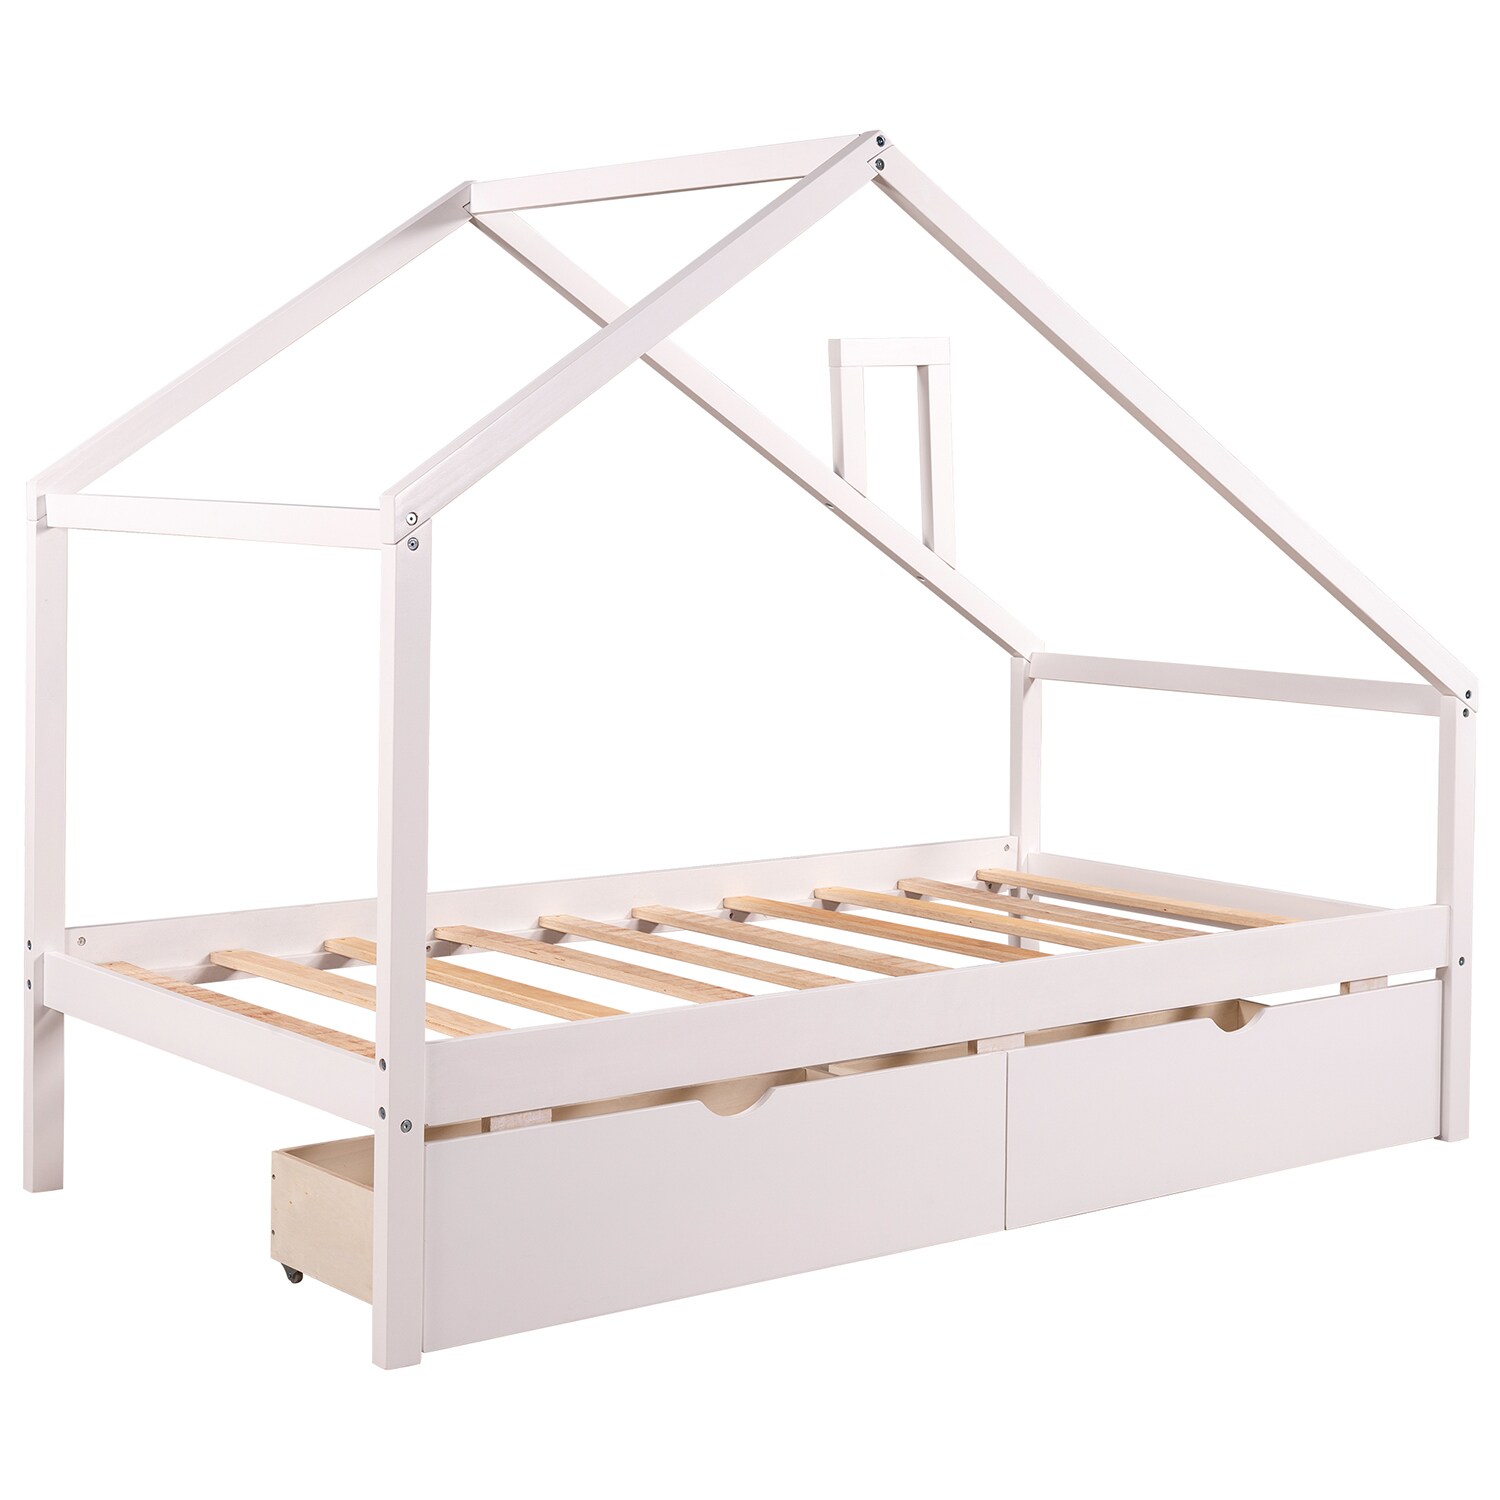 Mondawe White Twin Wood Daybed with Storage at Lowes.com